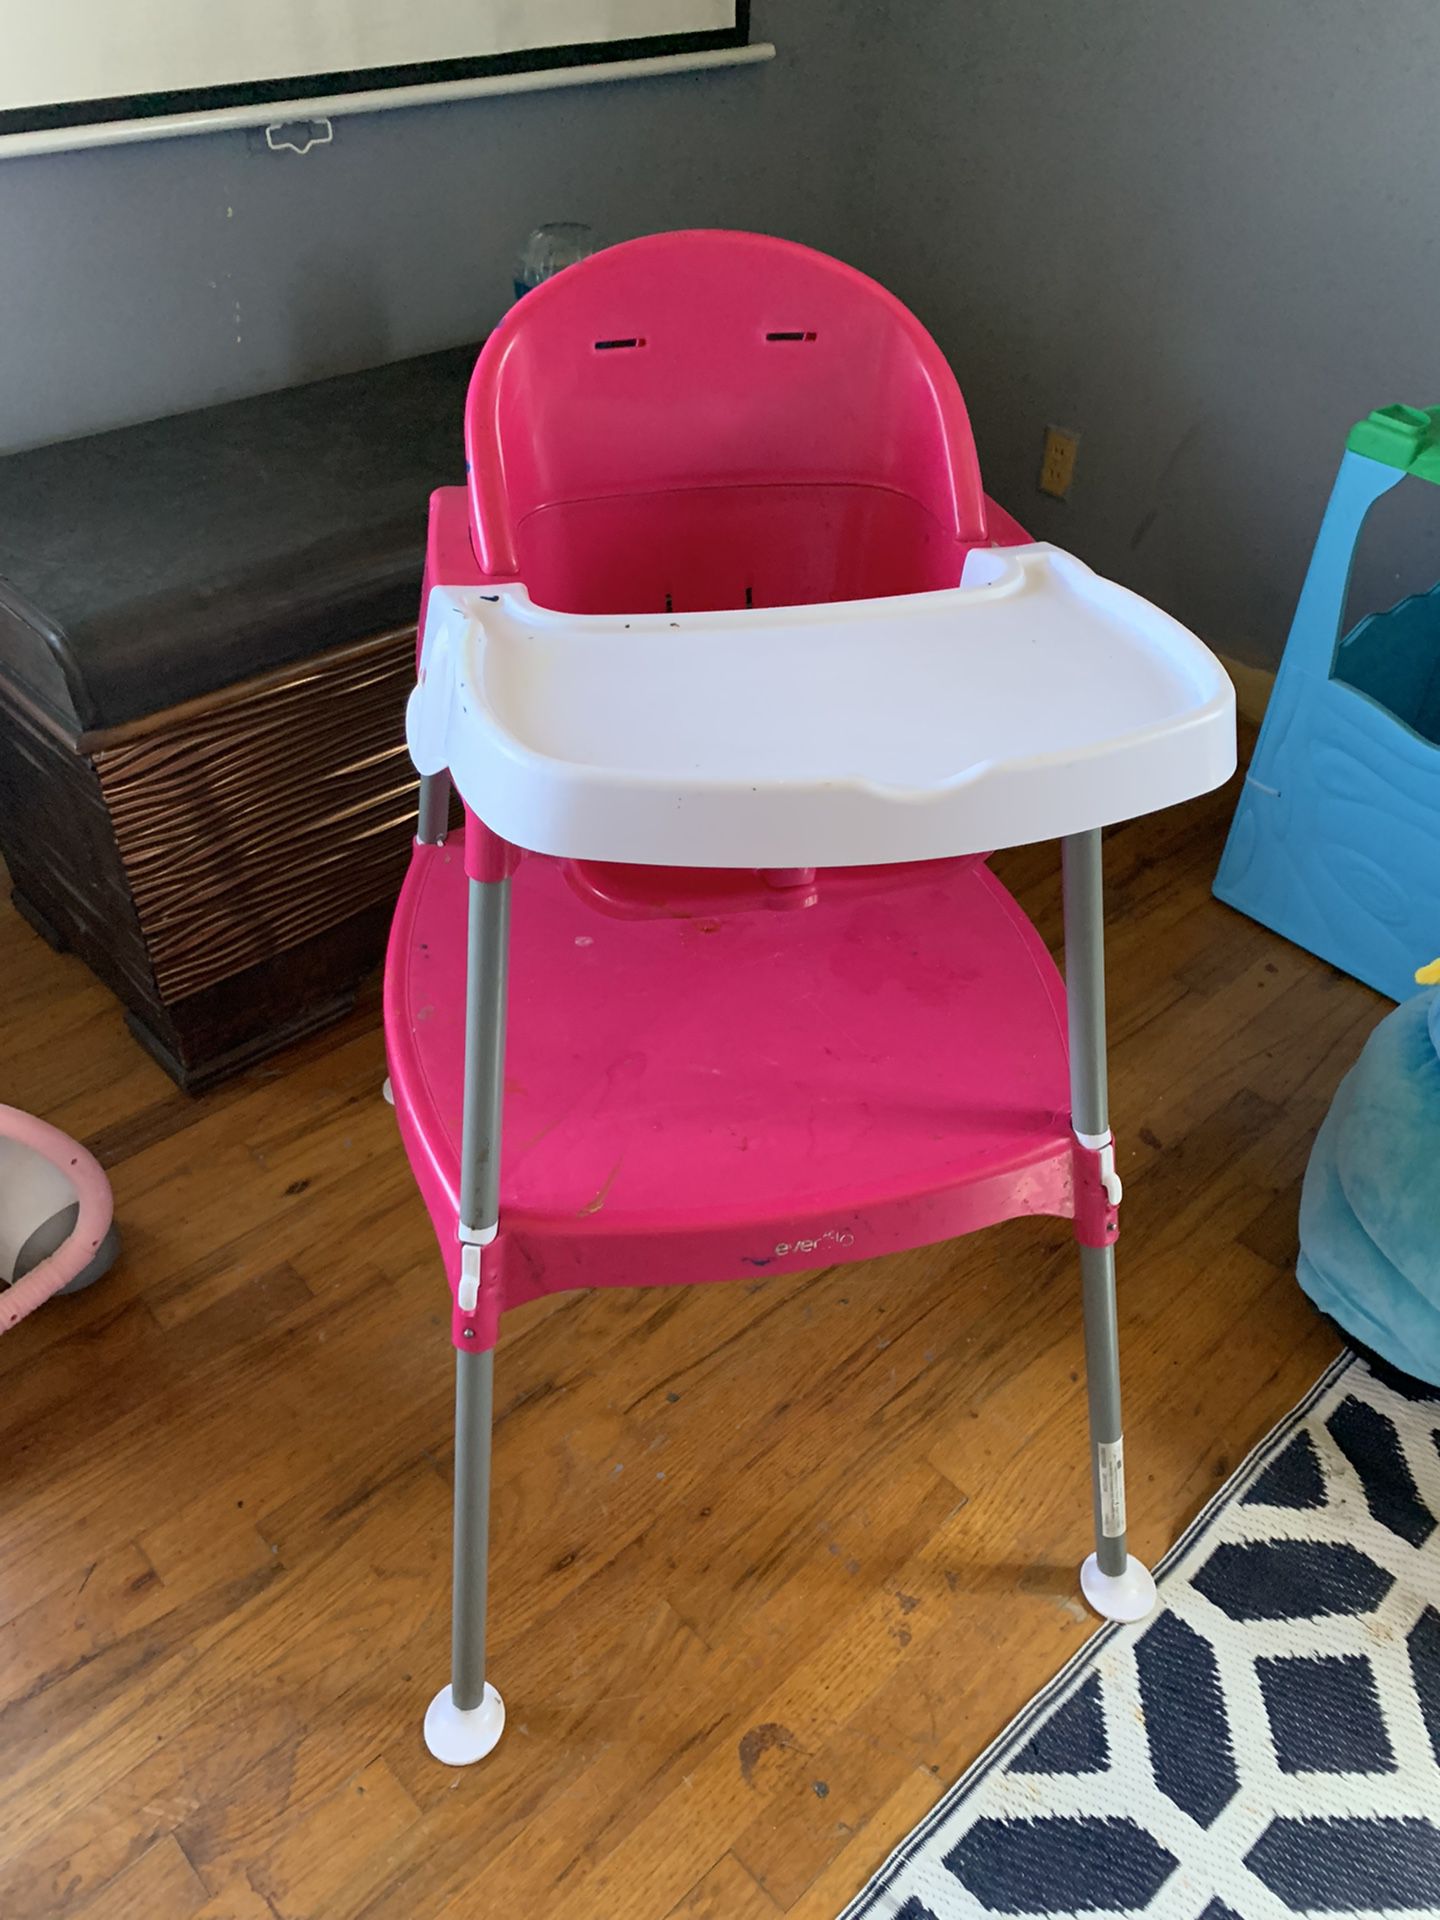 Evenflo four in one high chair